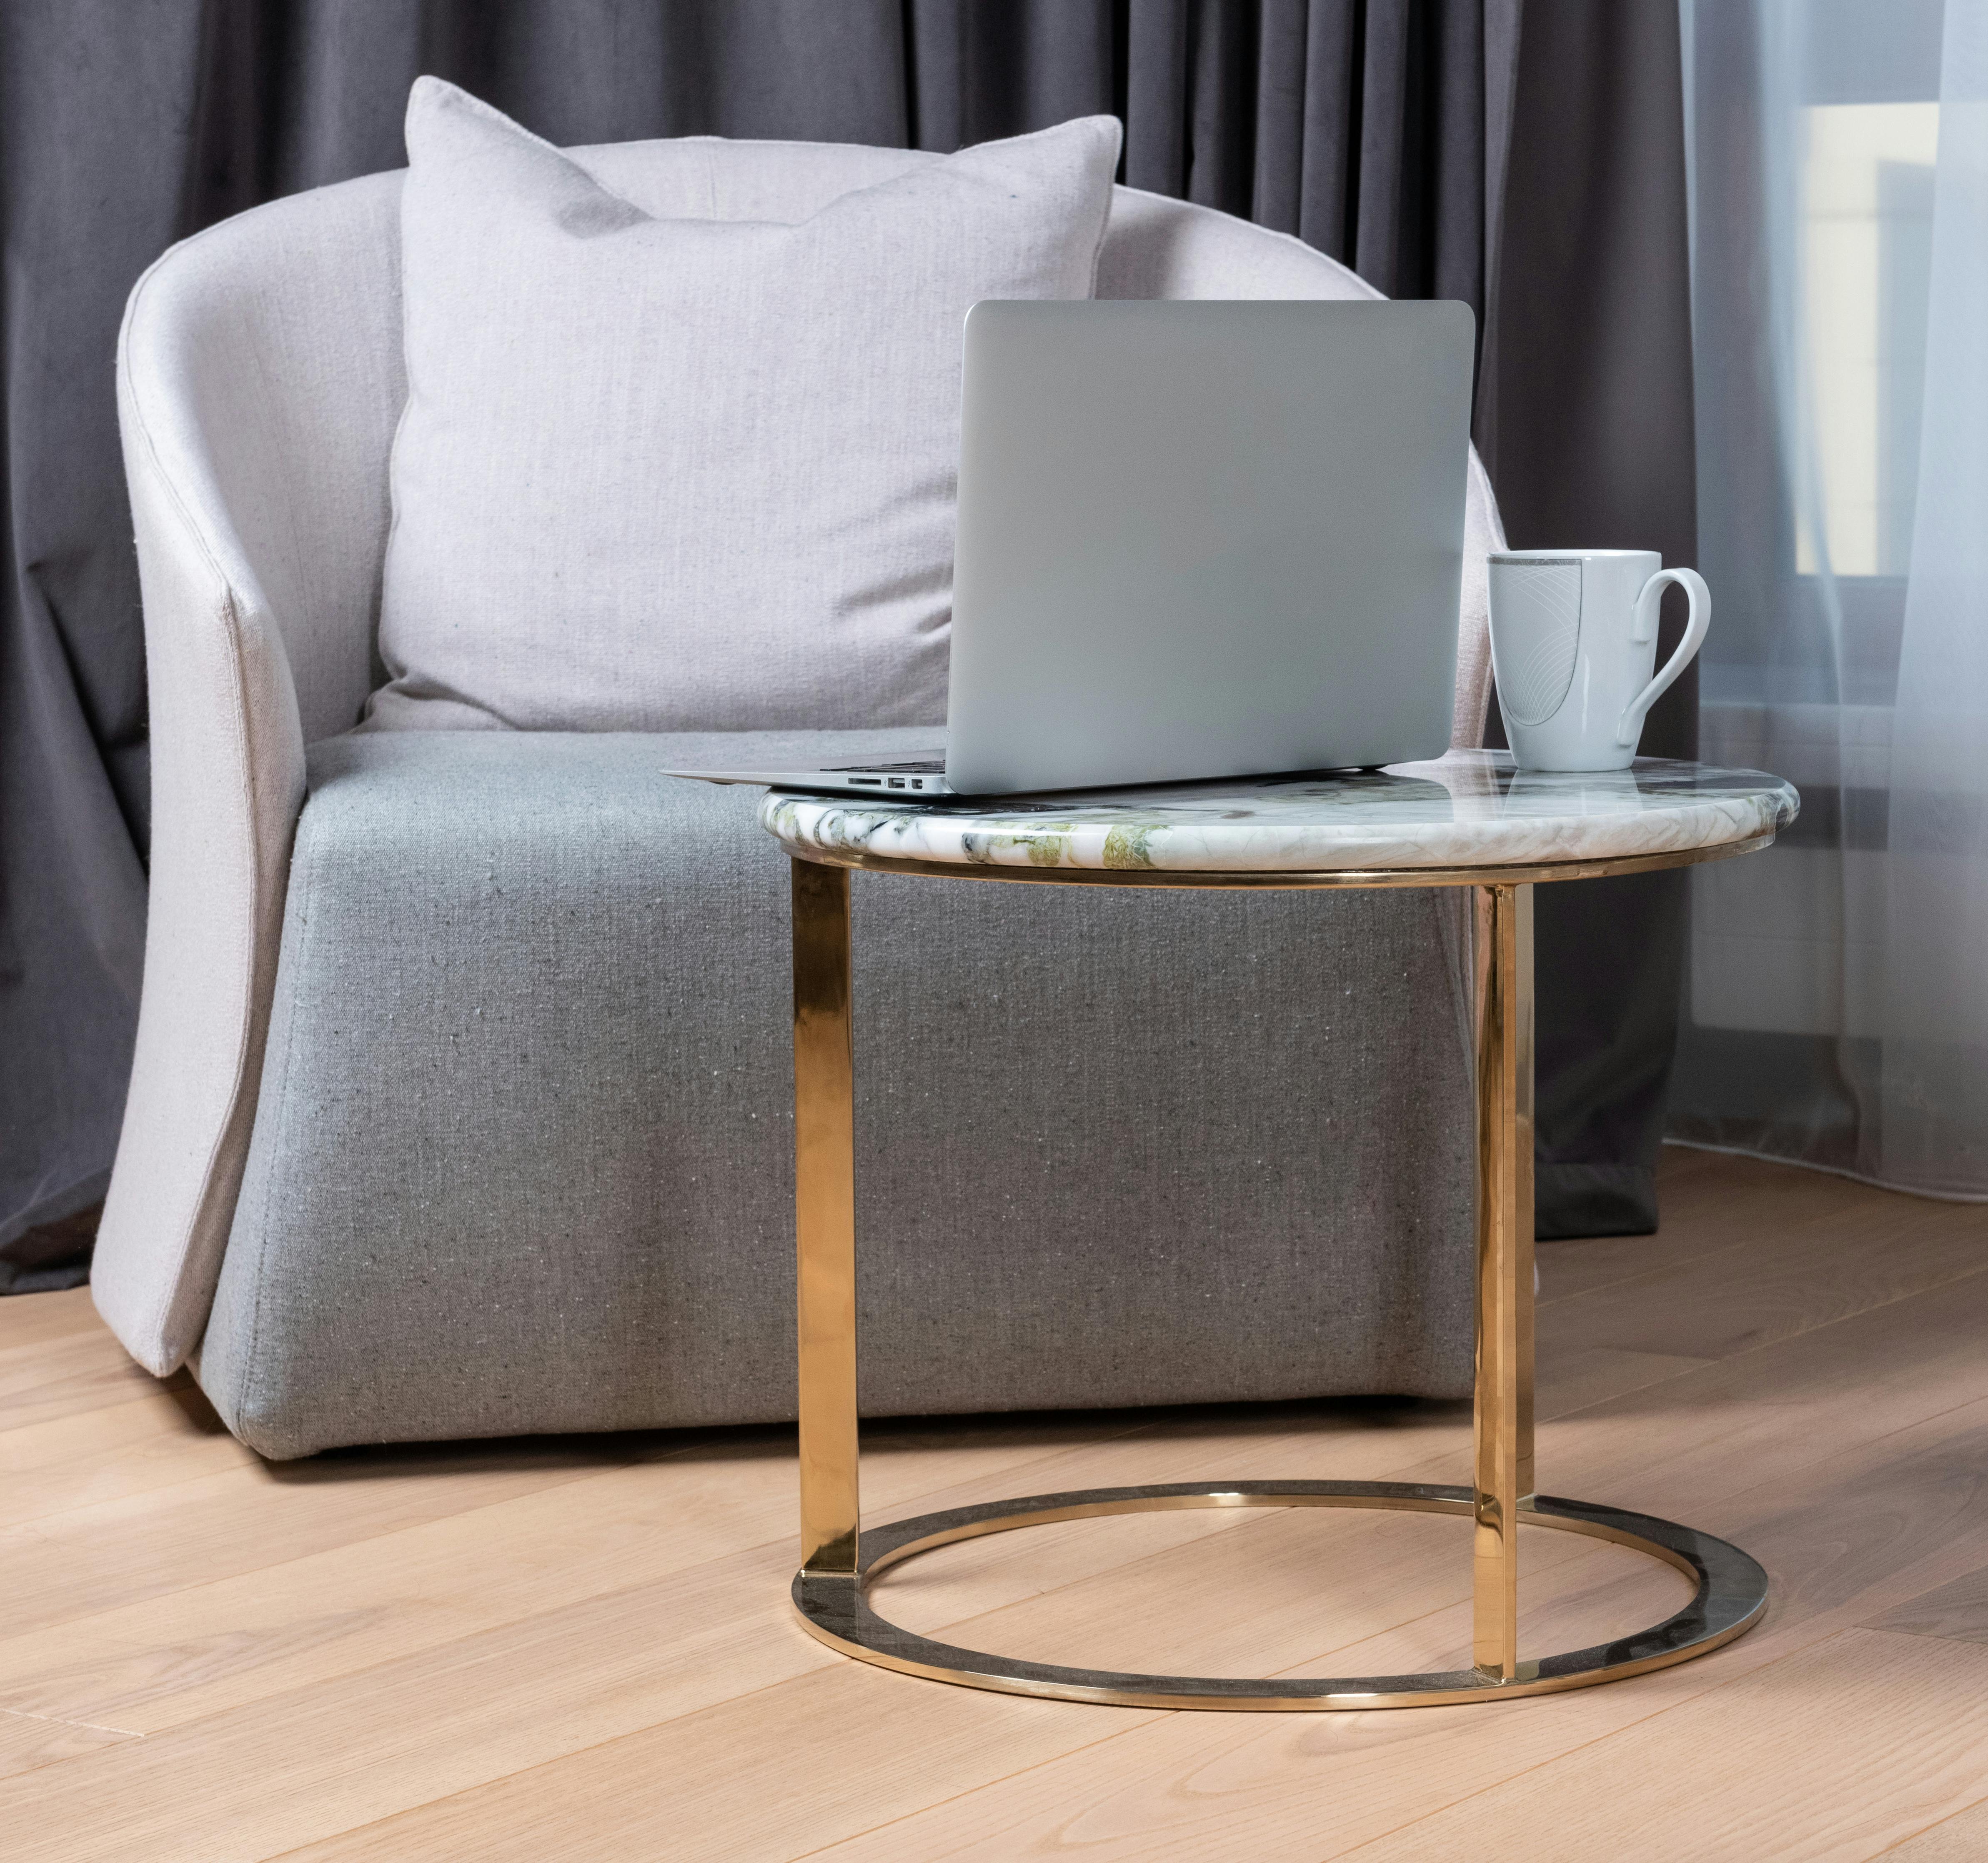 Laptop And Coffee Mug Placed On Small Table Near Armchair Free Stock Photo